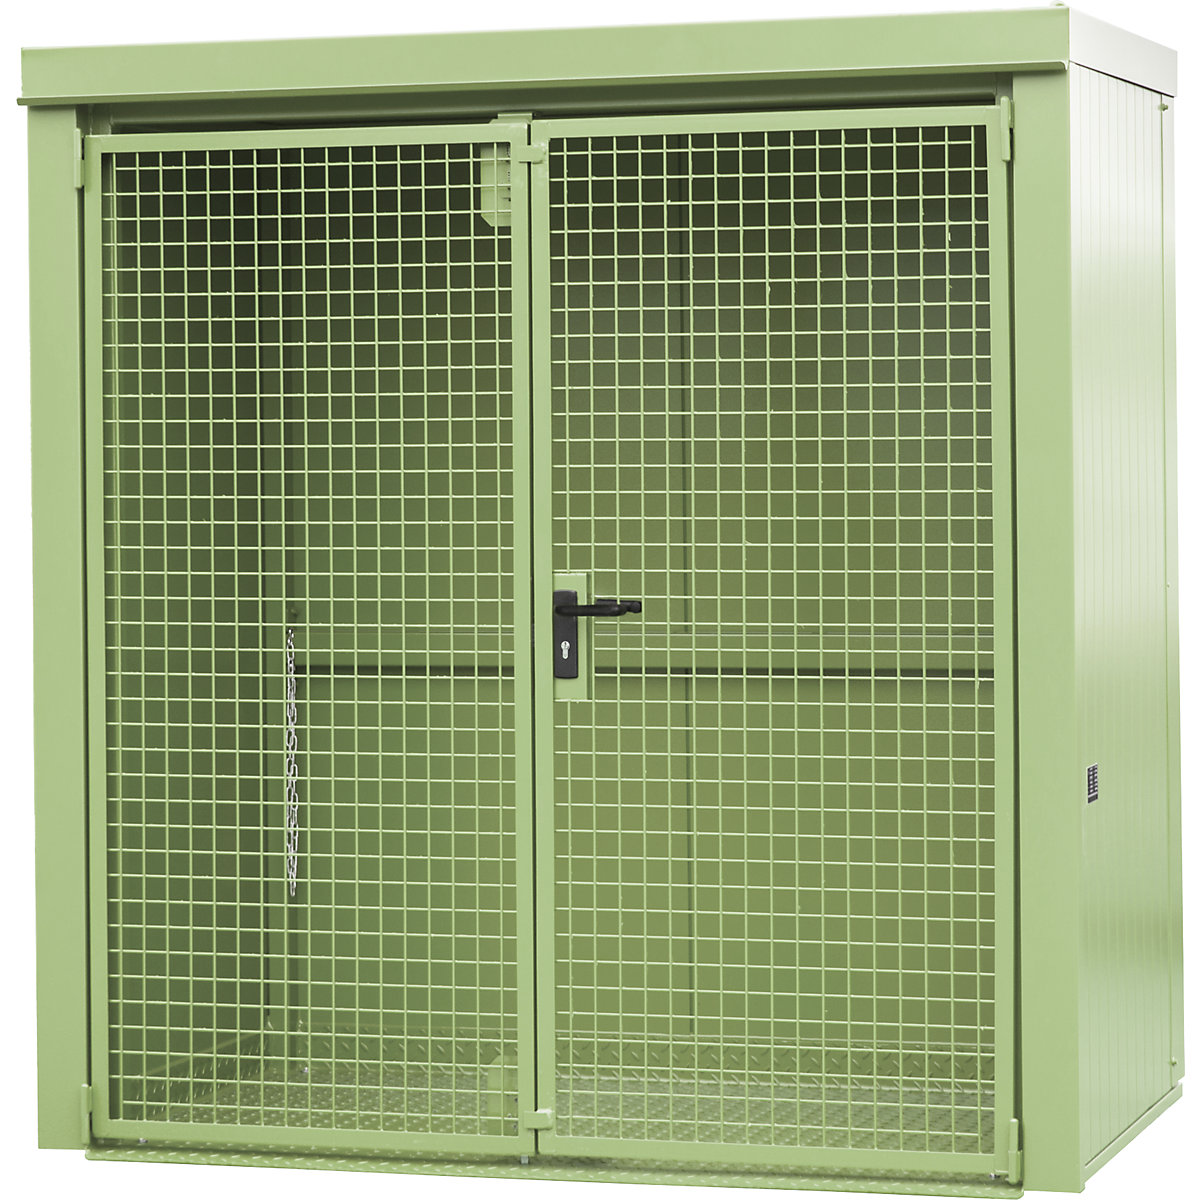 Gas cylinder container, fire resistant – eurokraft pro, for 28 cylinders with Ø 230 mm, green-5